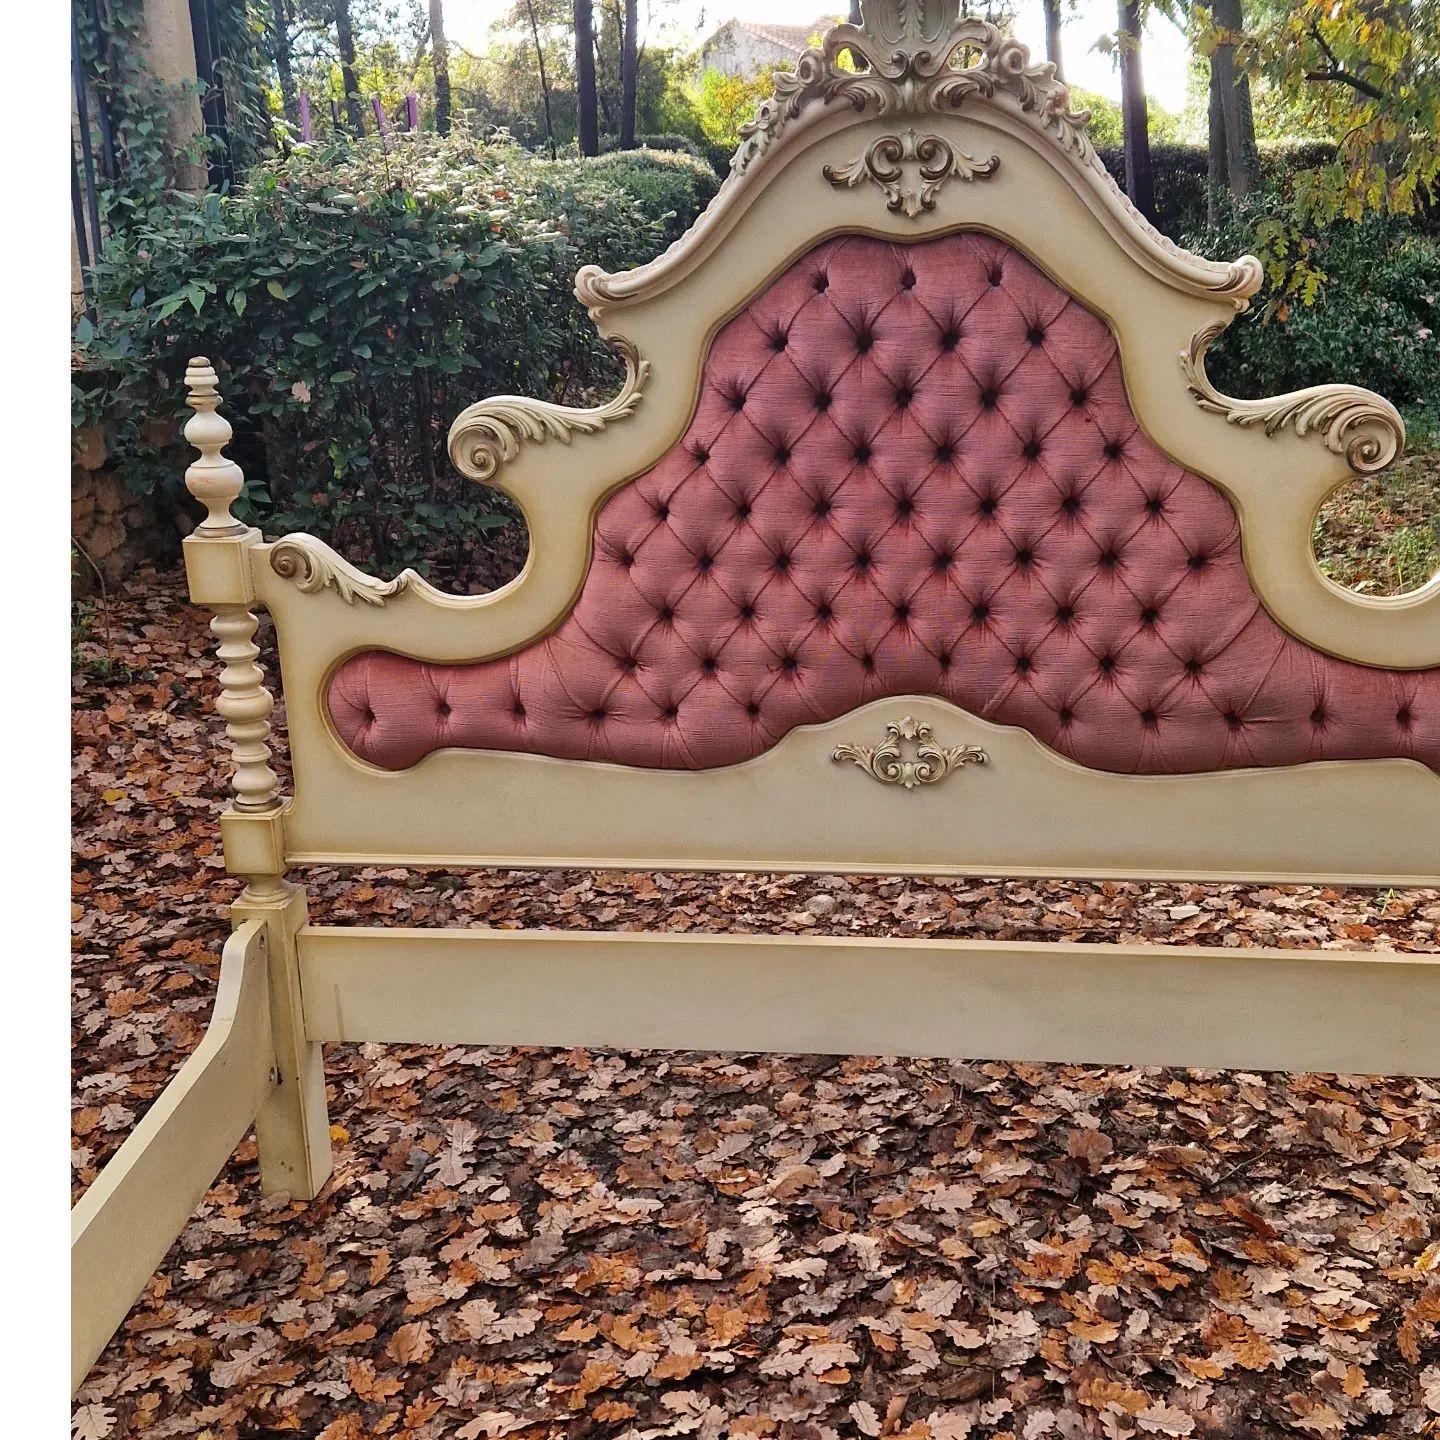 Sourced from Imperia in Italy

Fabulous Italian venetian bed
Super king size 180 x 200cm
Carved wood frame
Pink tufted upholstery
Shell Crest

Cream Lacquered Frame - Some chips to the Paint & Scratches to the back of the headboard
Gilt